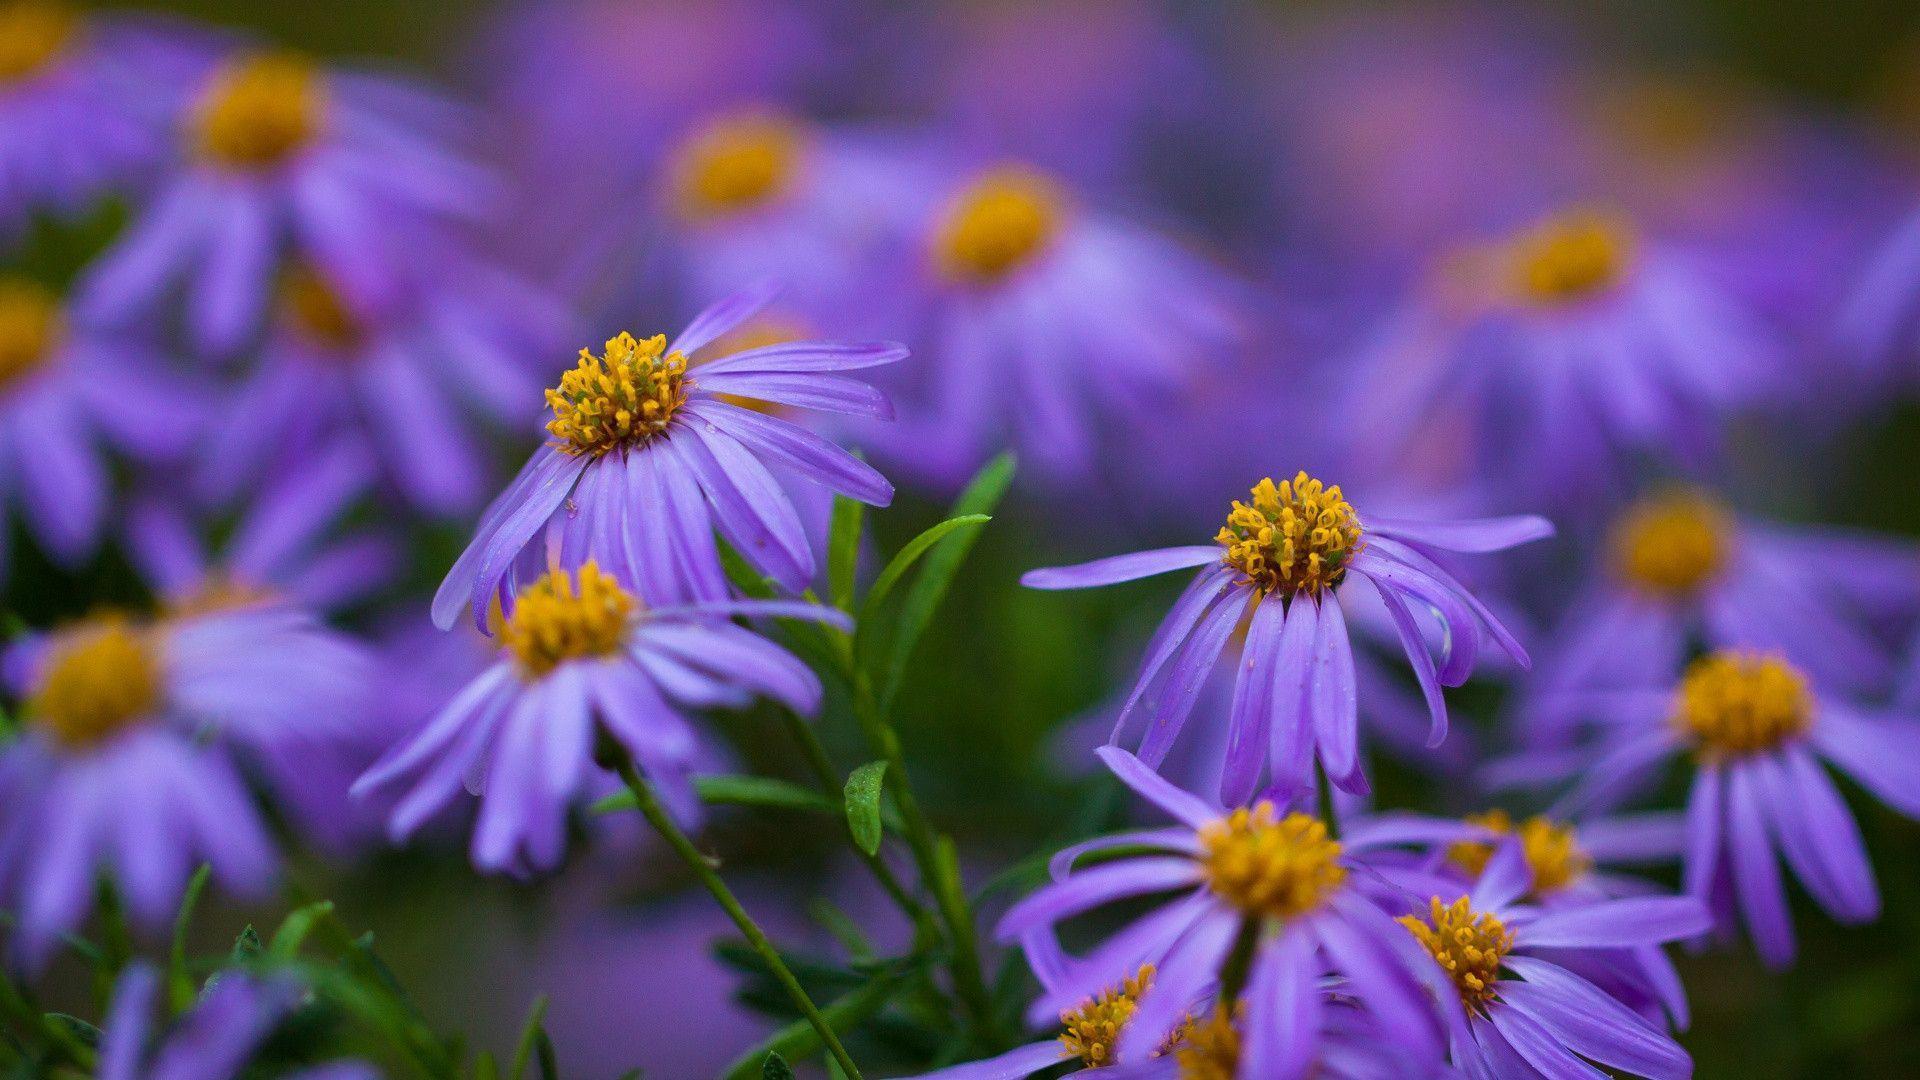 Beautiful Purple Flowers Pictures Hd Image 3 HD Wallpapers